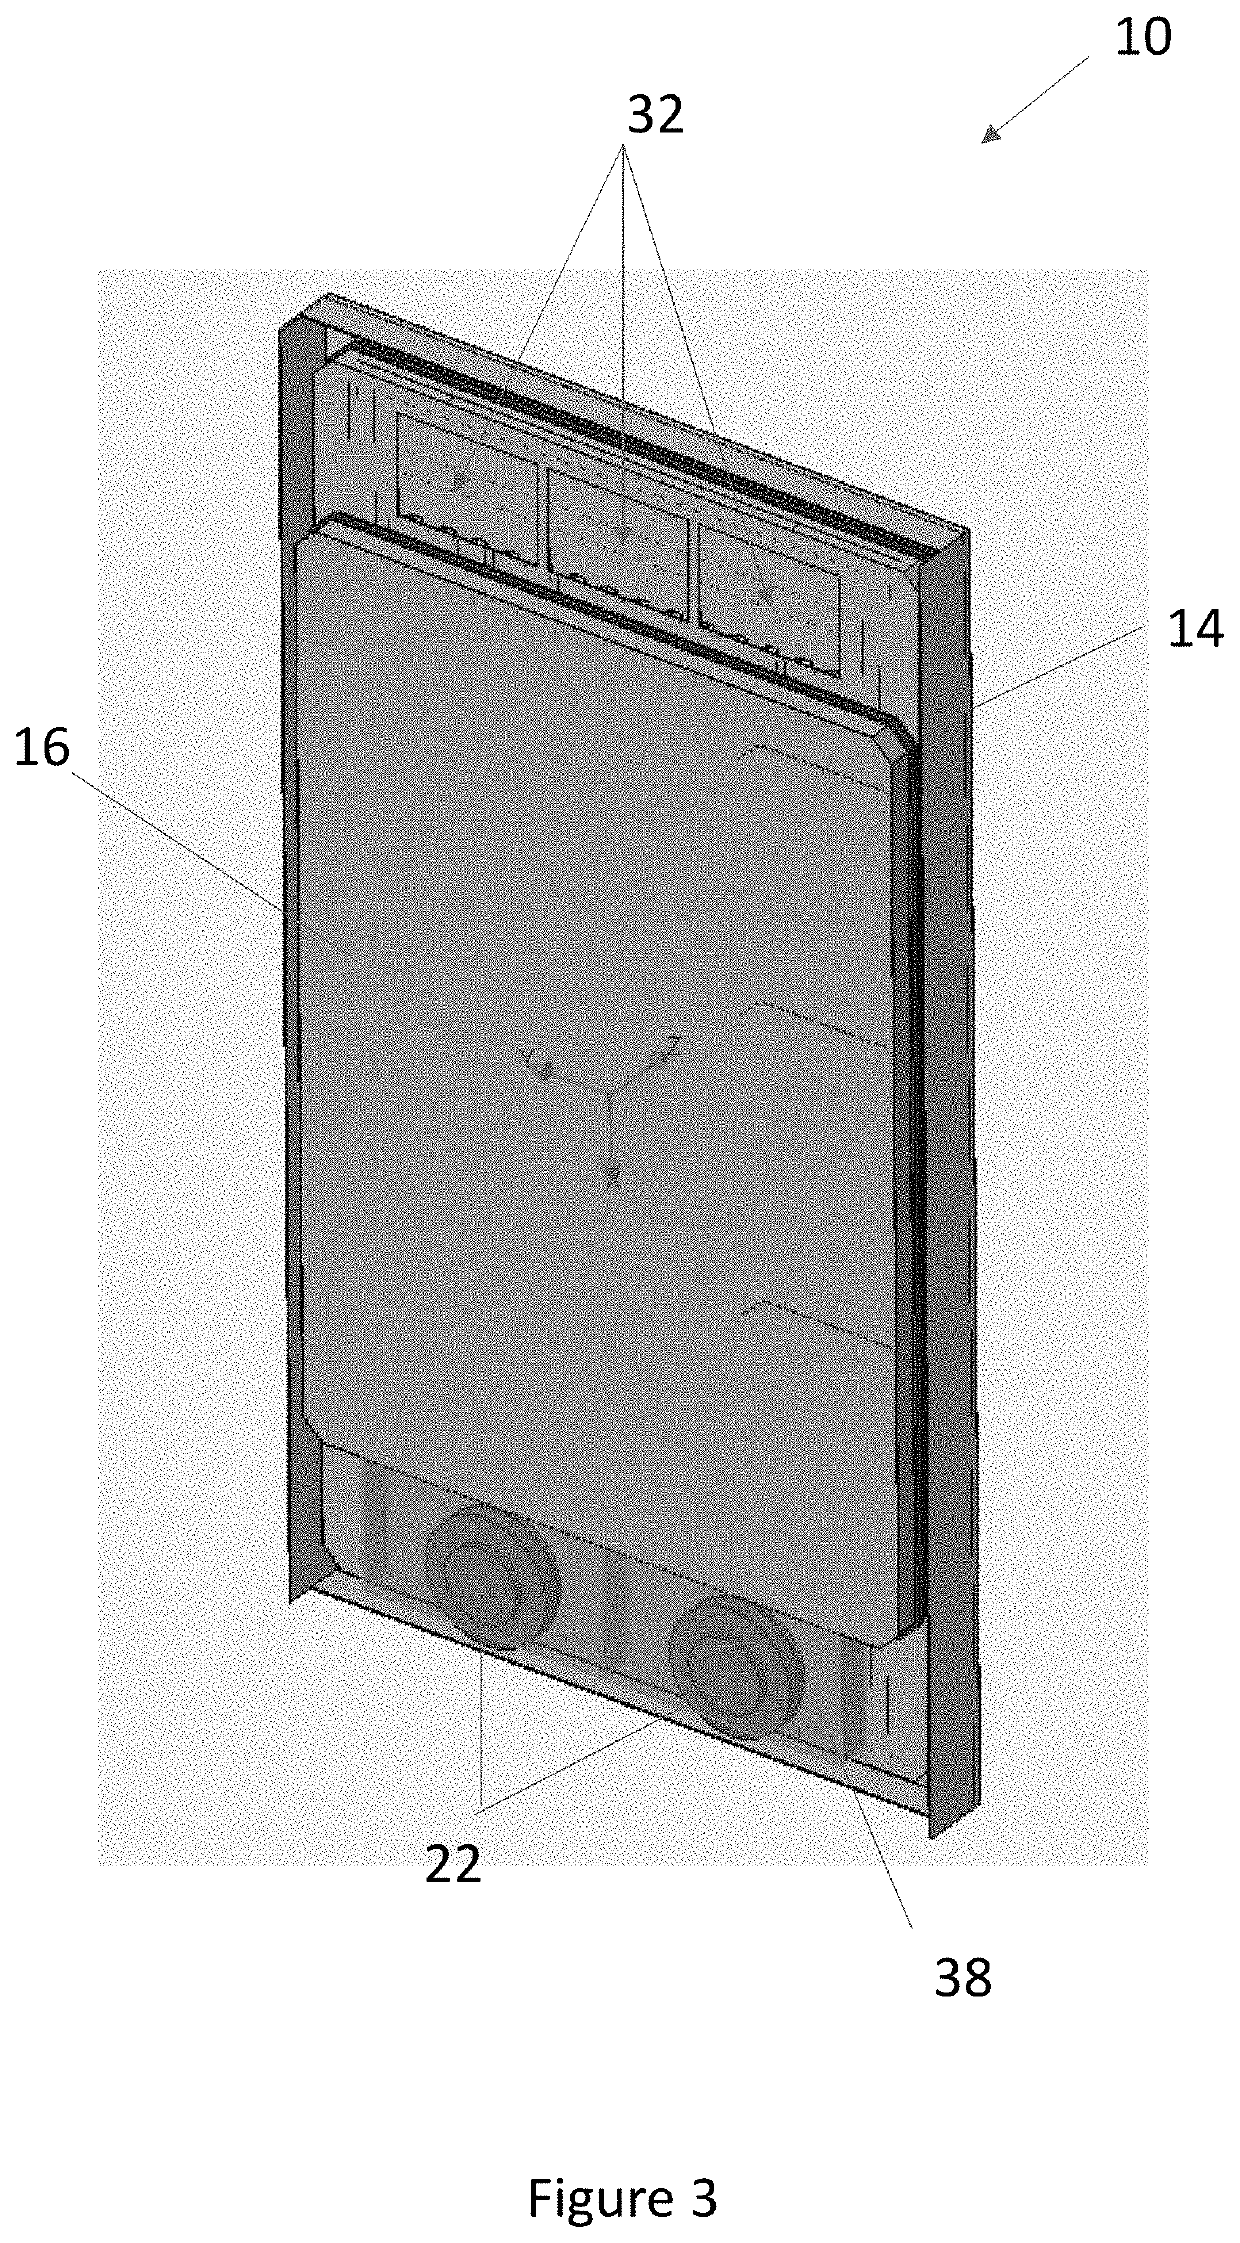 Display assemblies incorporating electric vehicle charging equipment